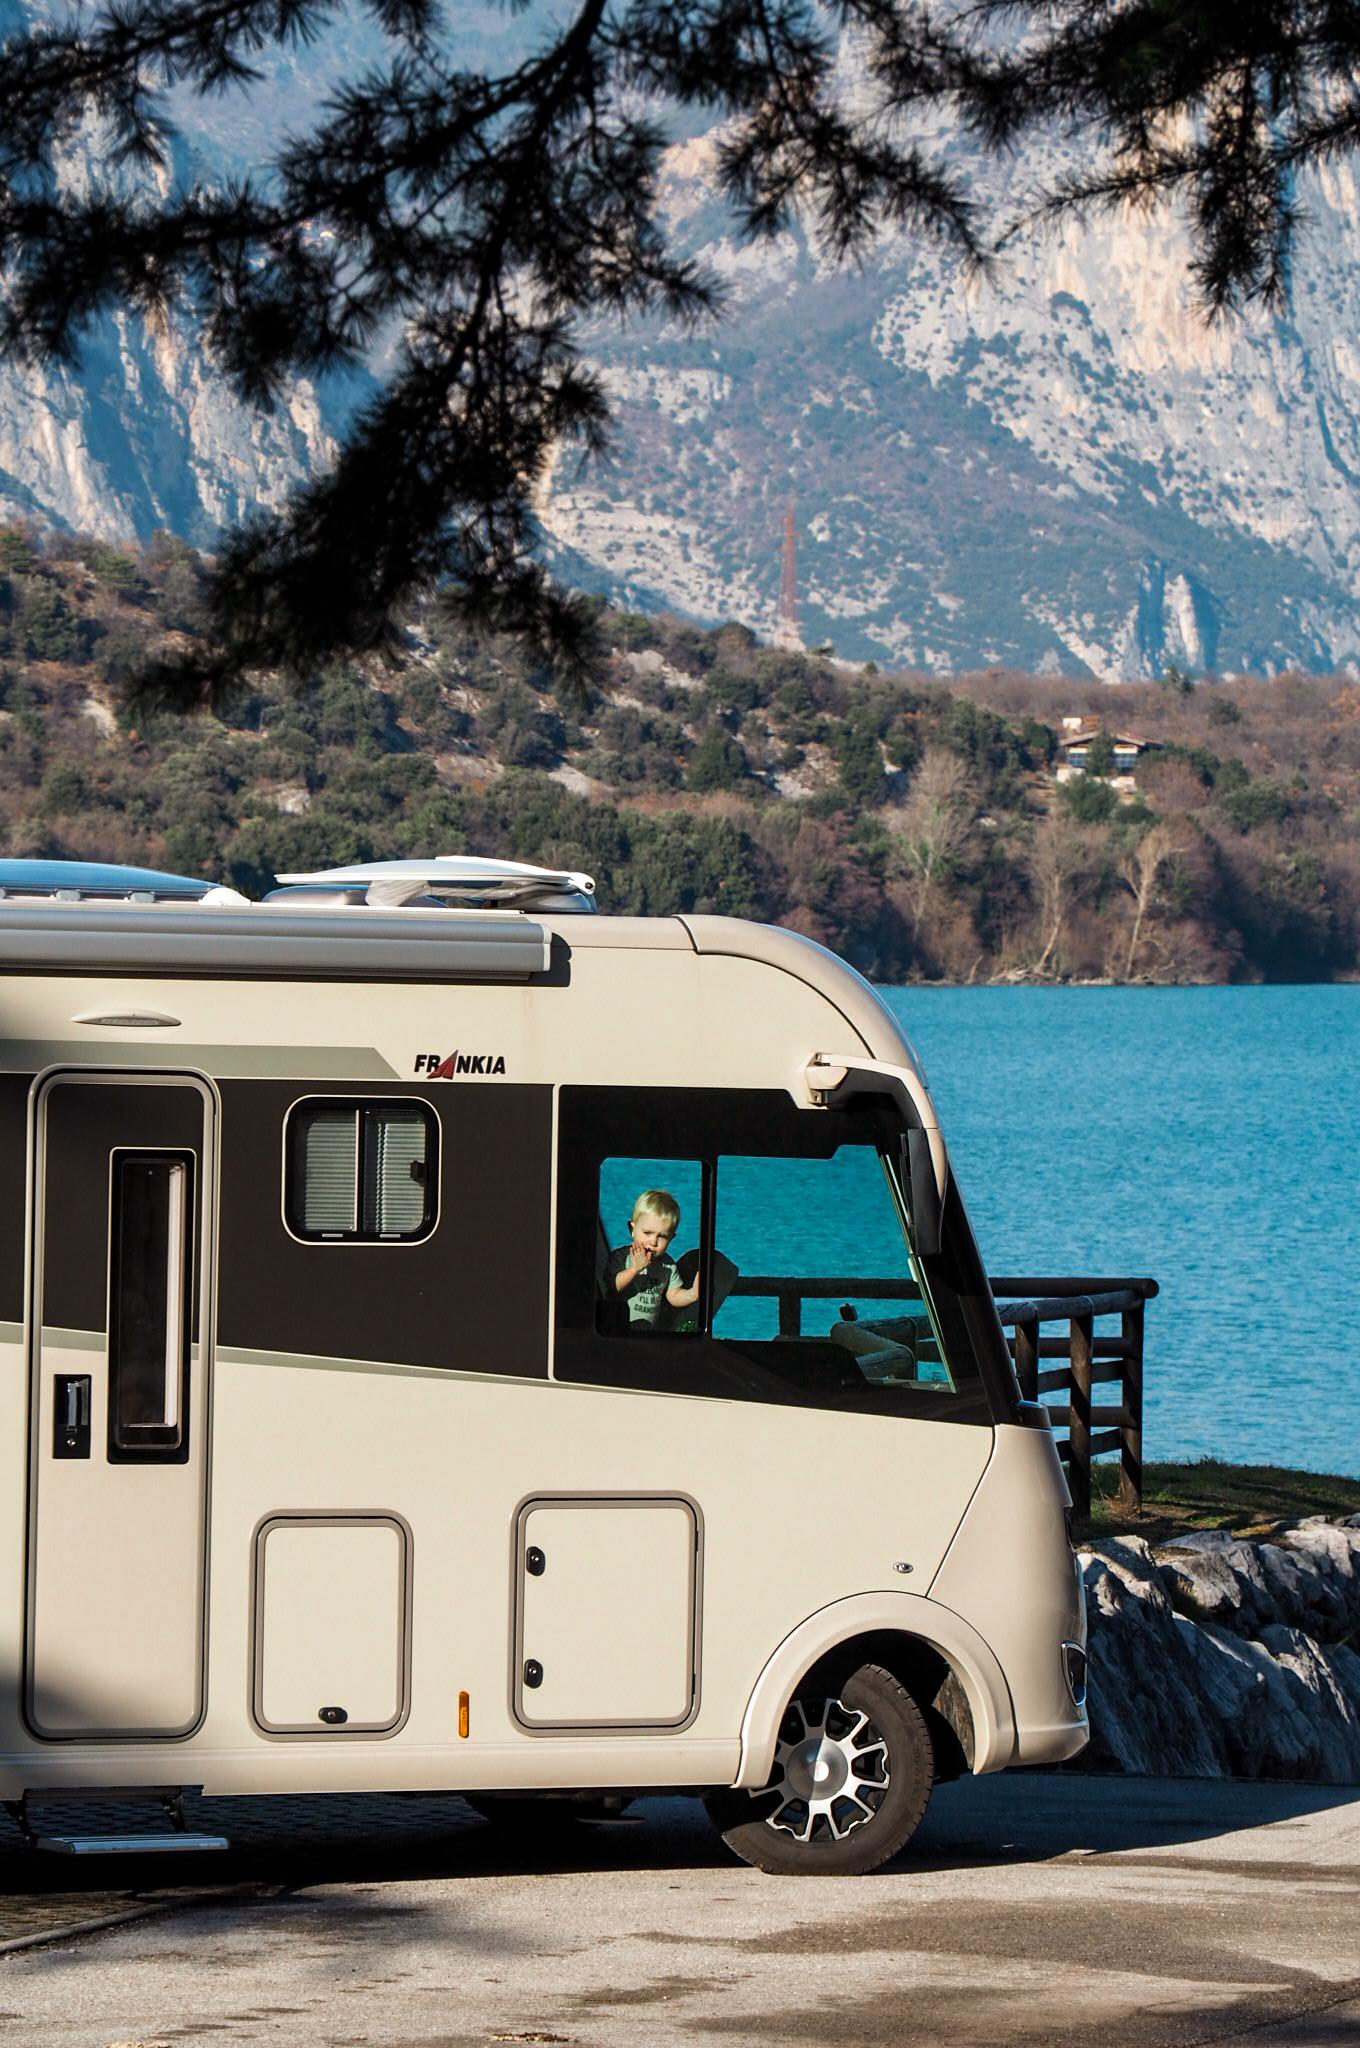 Types of motorhomes - a practical guide – image 3